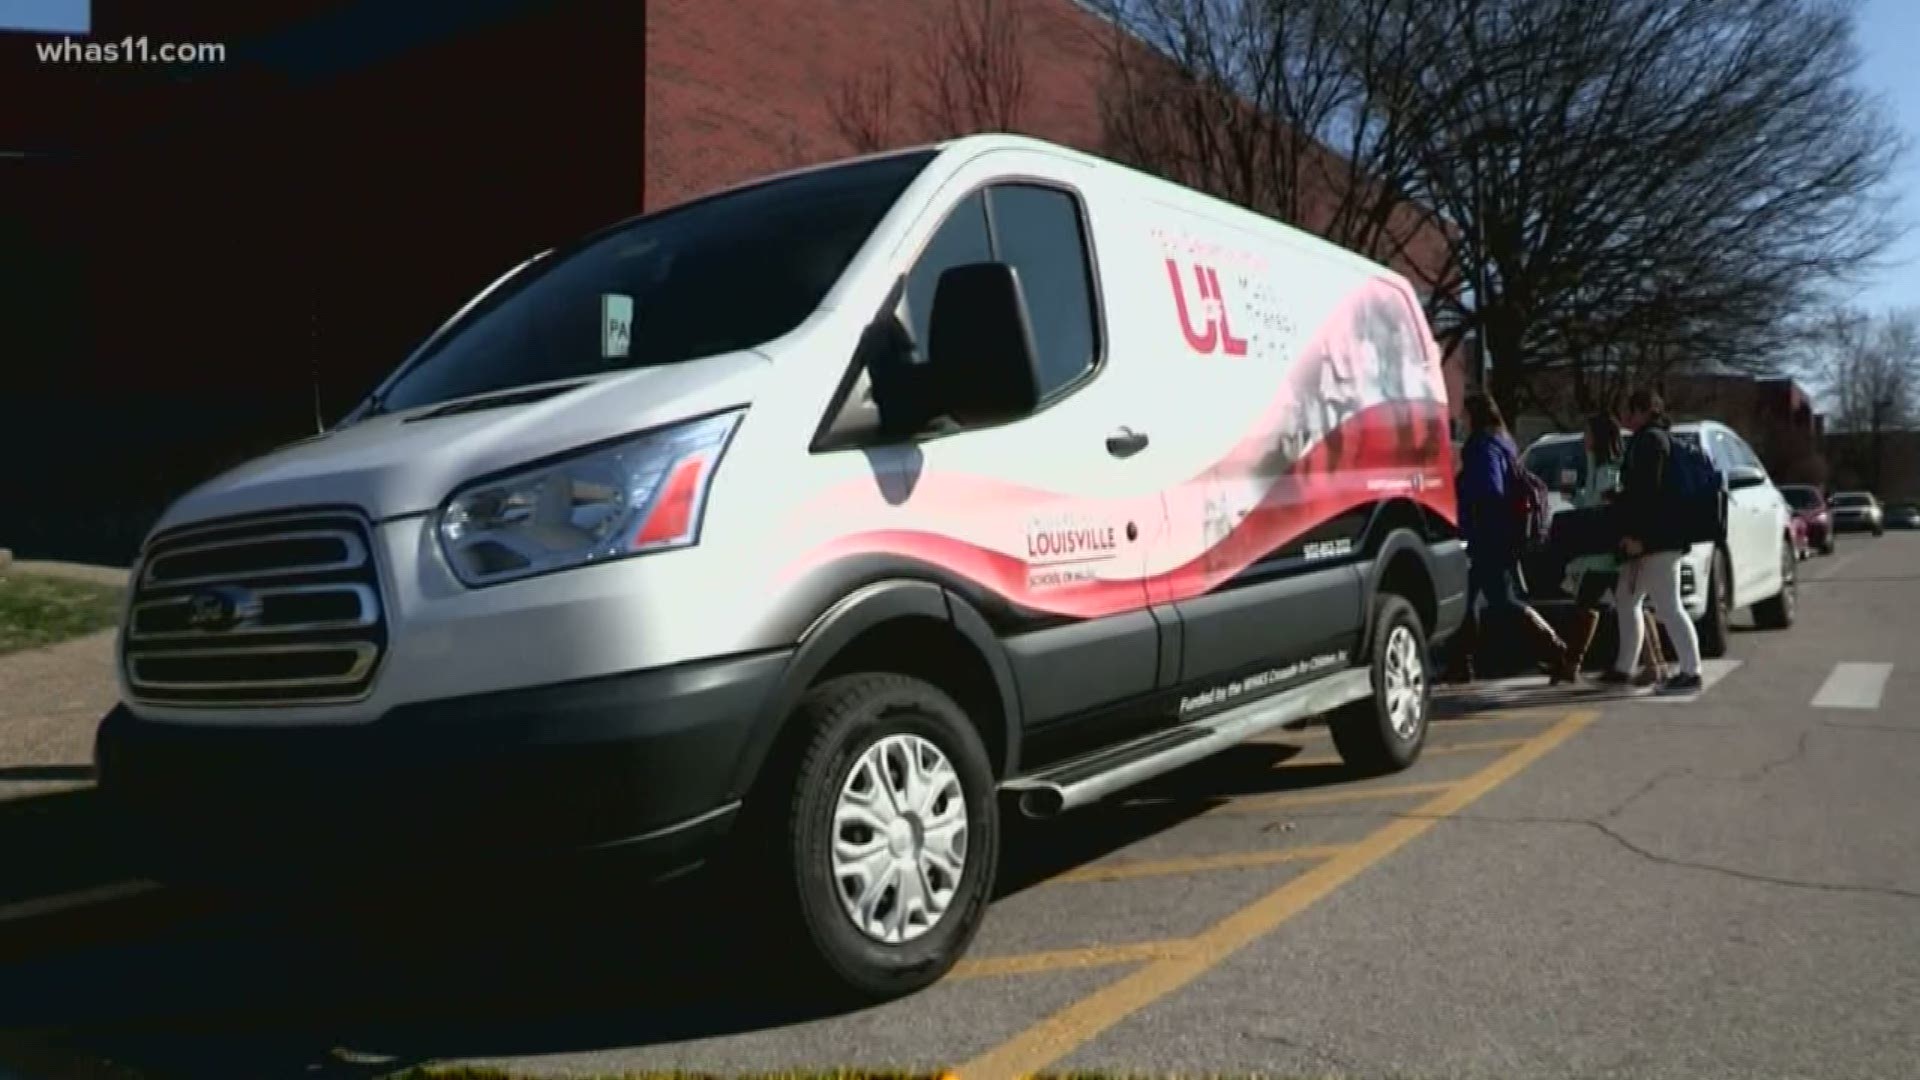 UofL's new music therapy van, funded buy the WHAS Crusade for Children, will help take services to children with special needs.